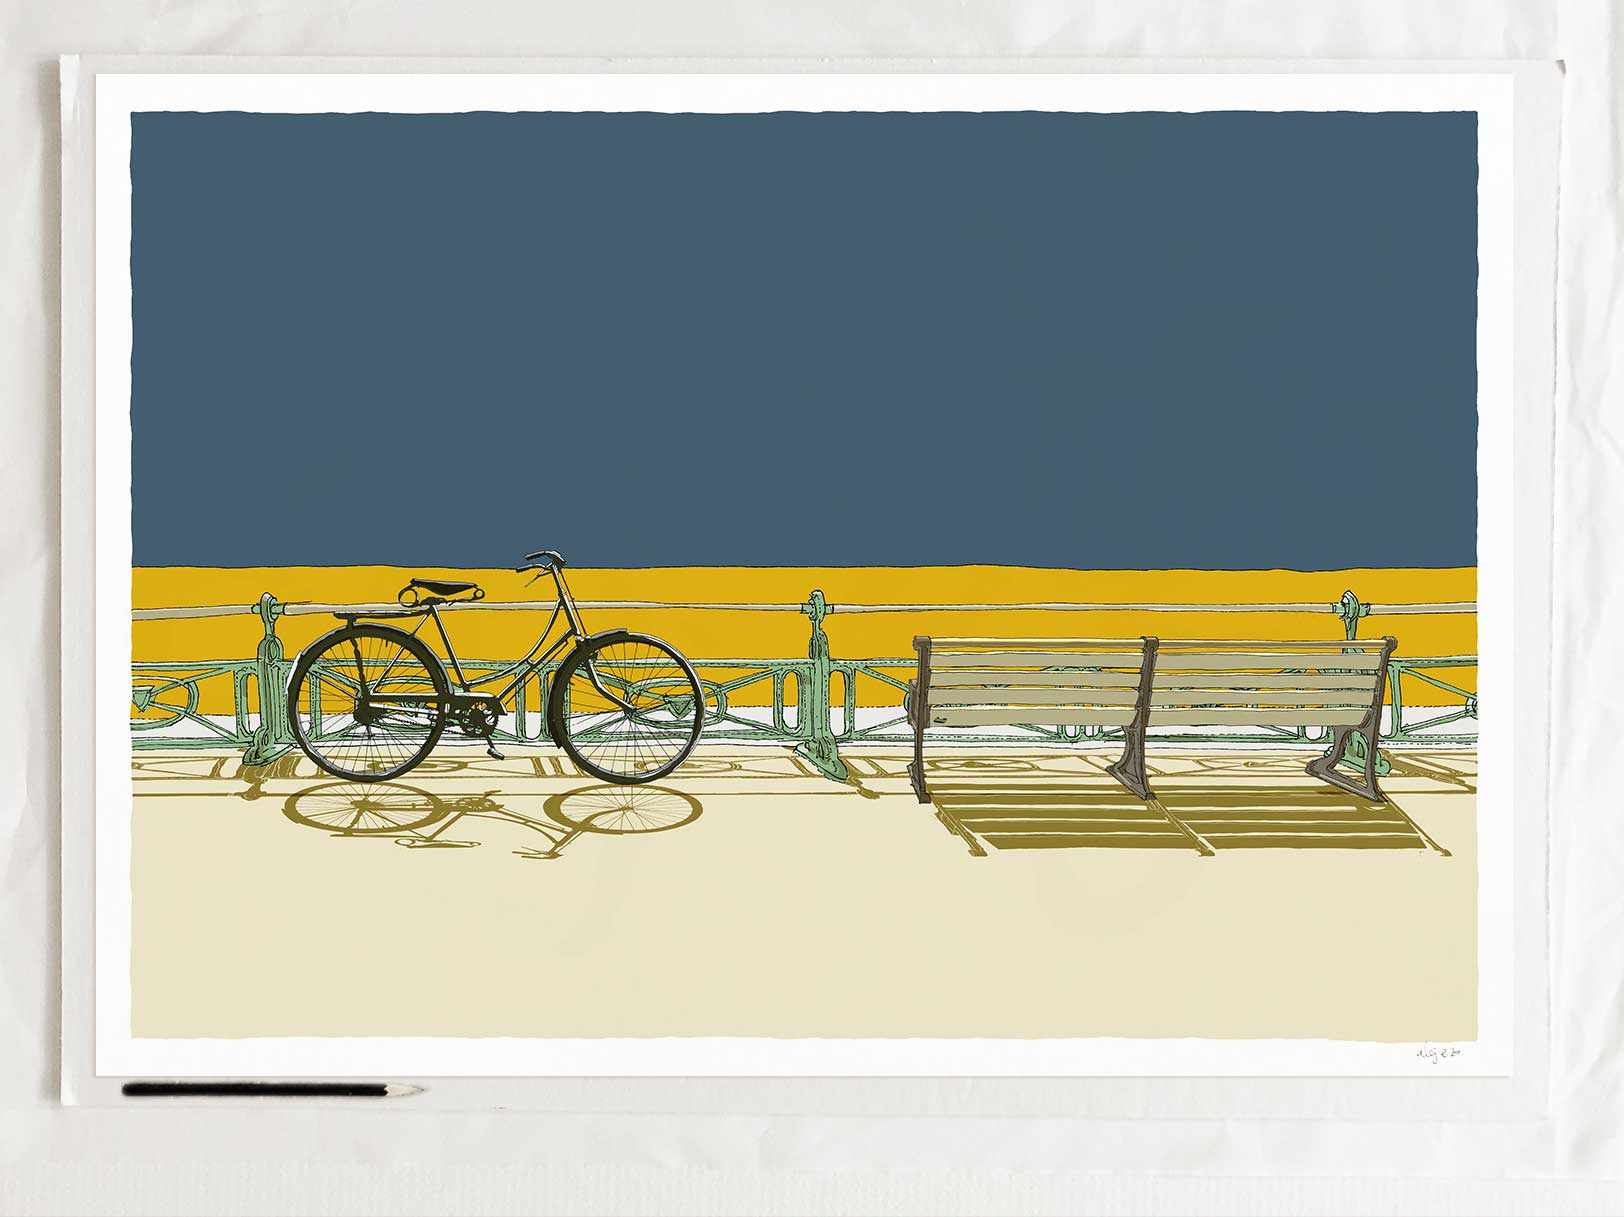 art print titled Bicycle and bench, Brighton Seafront by artist alej ez